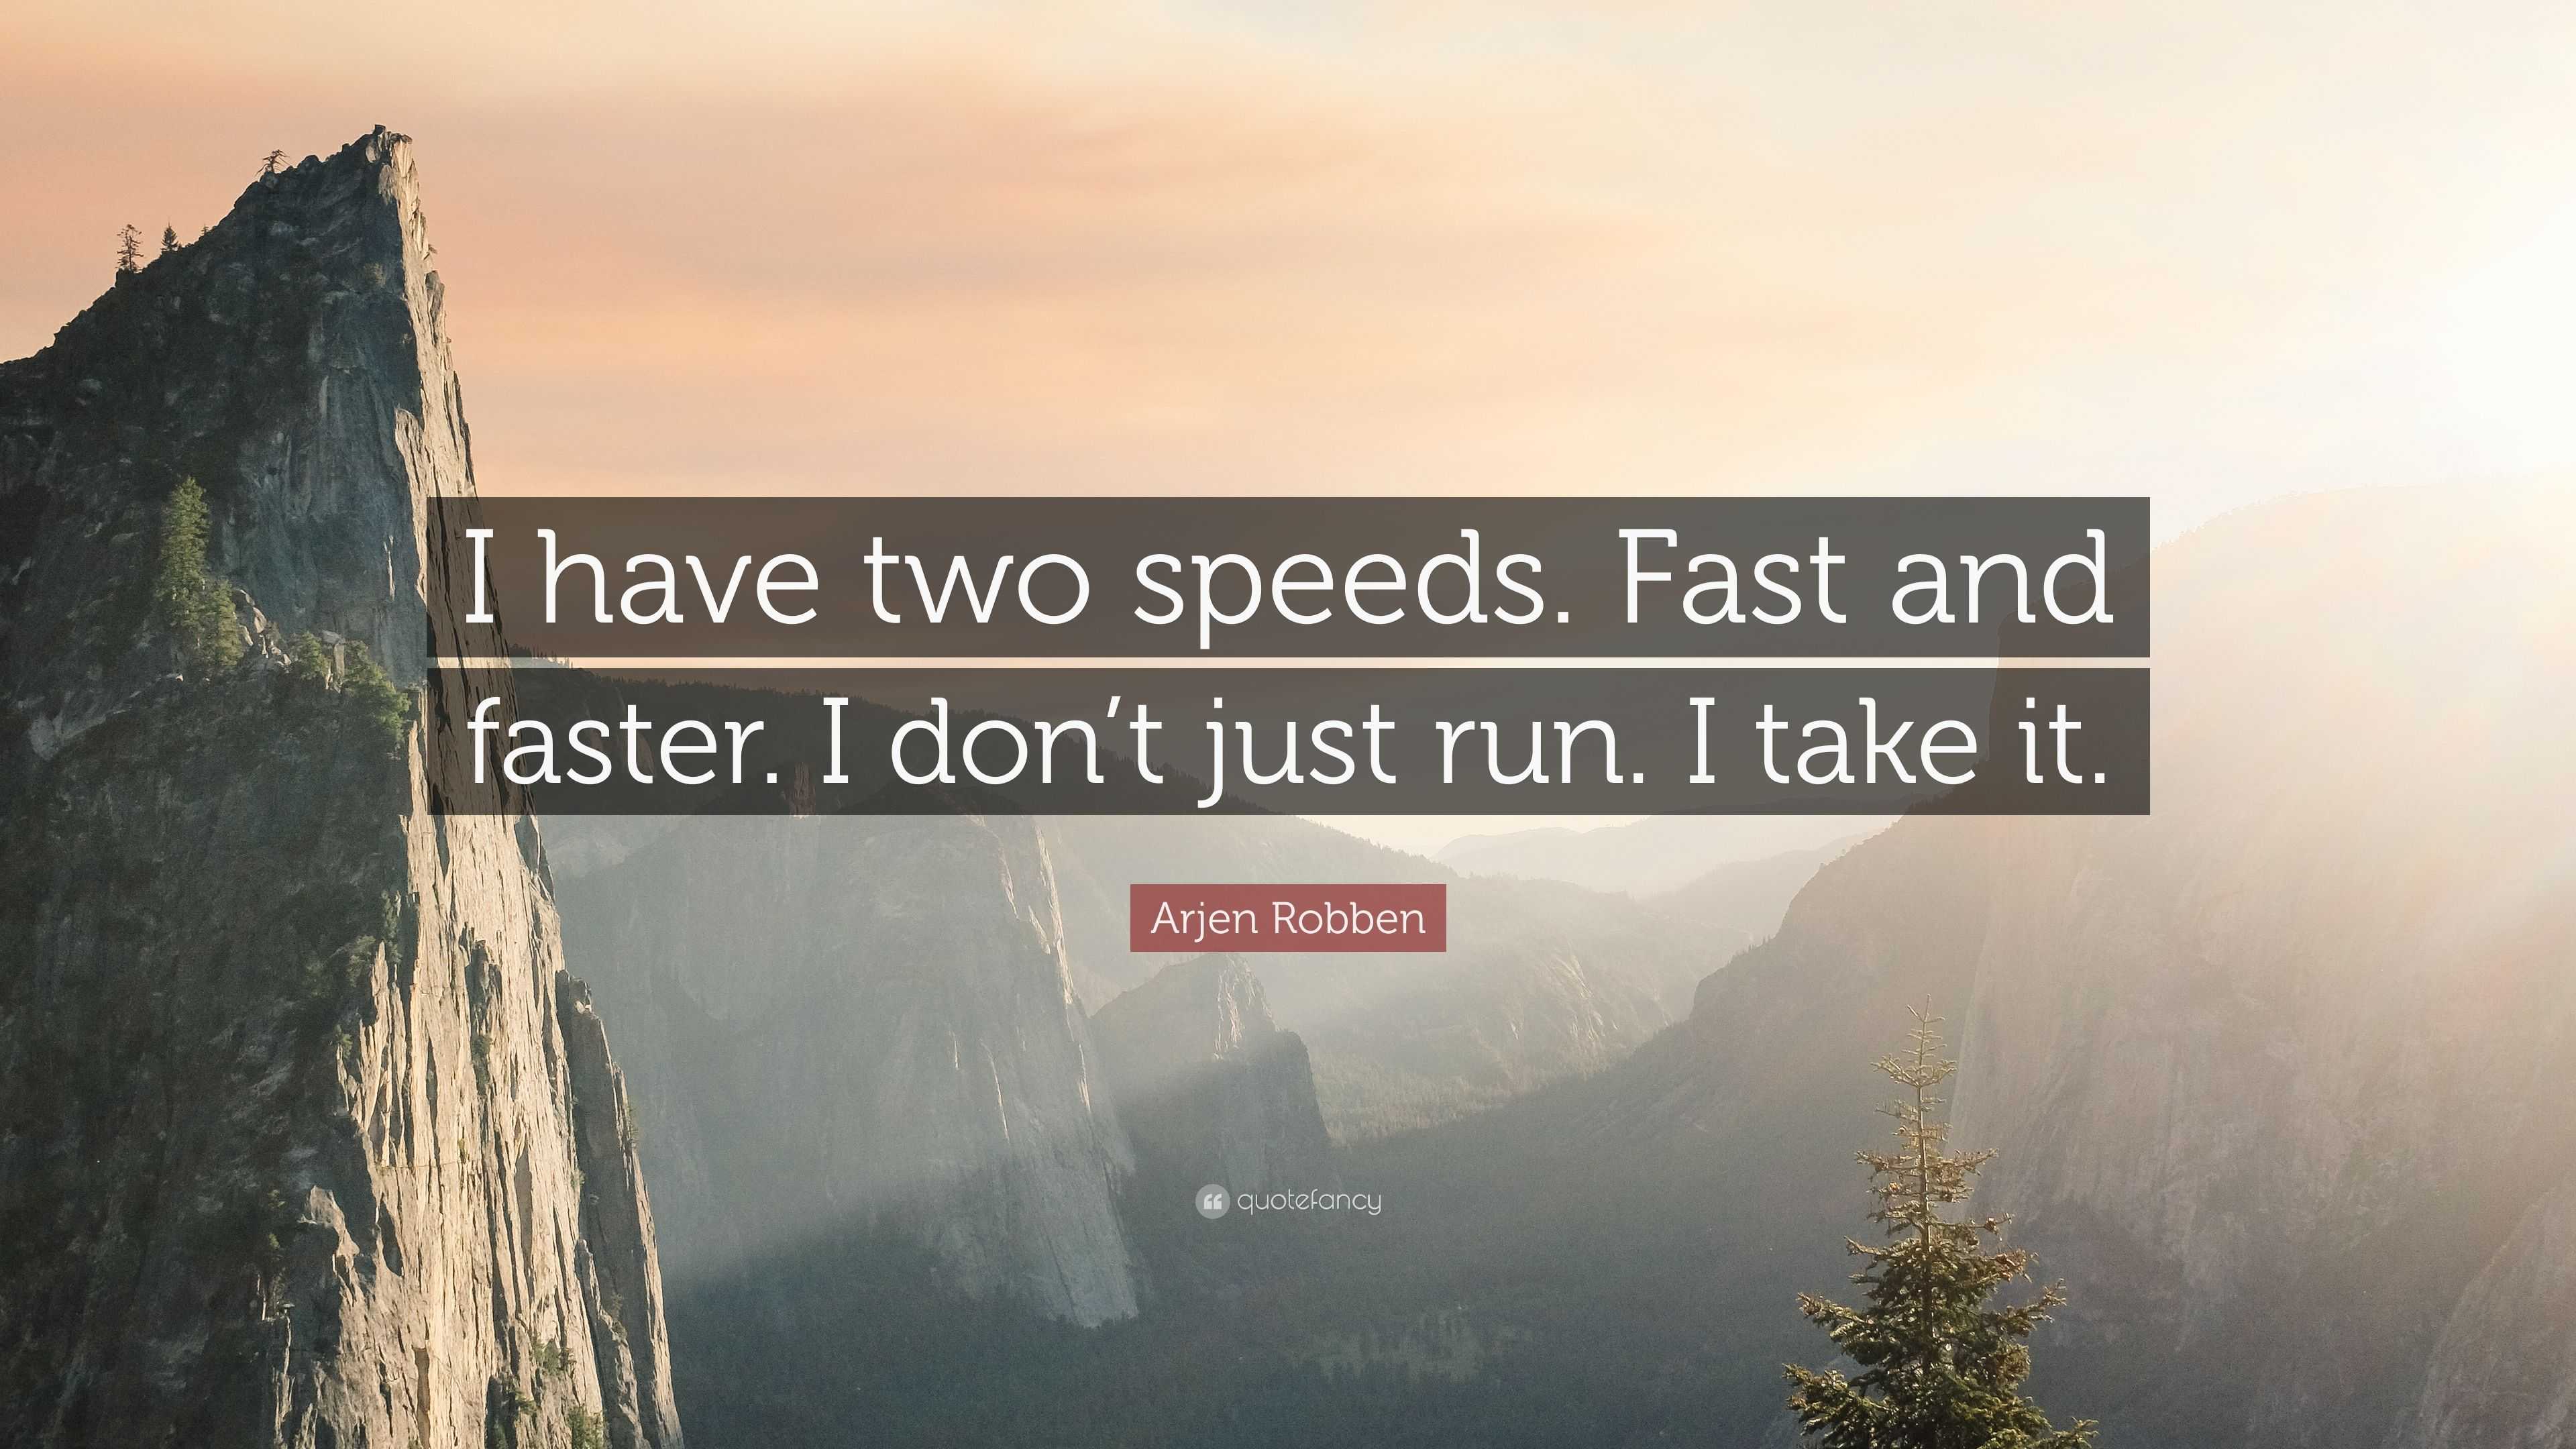 Arjen Robben Quote “I have two speeds. Fast and faster. I don’t just